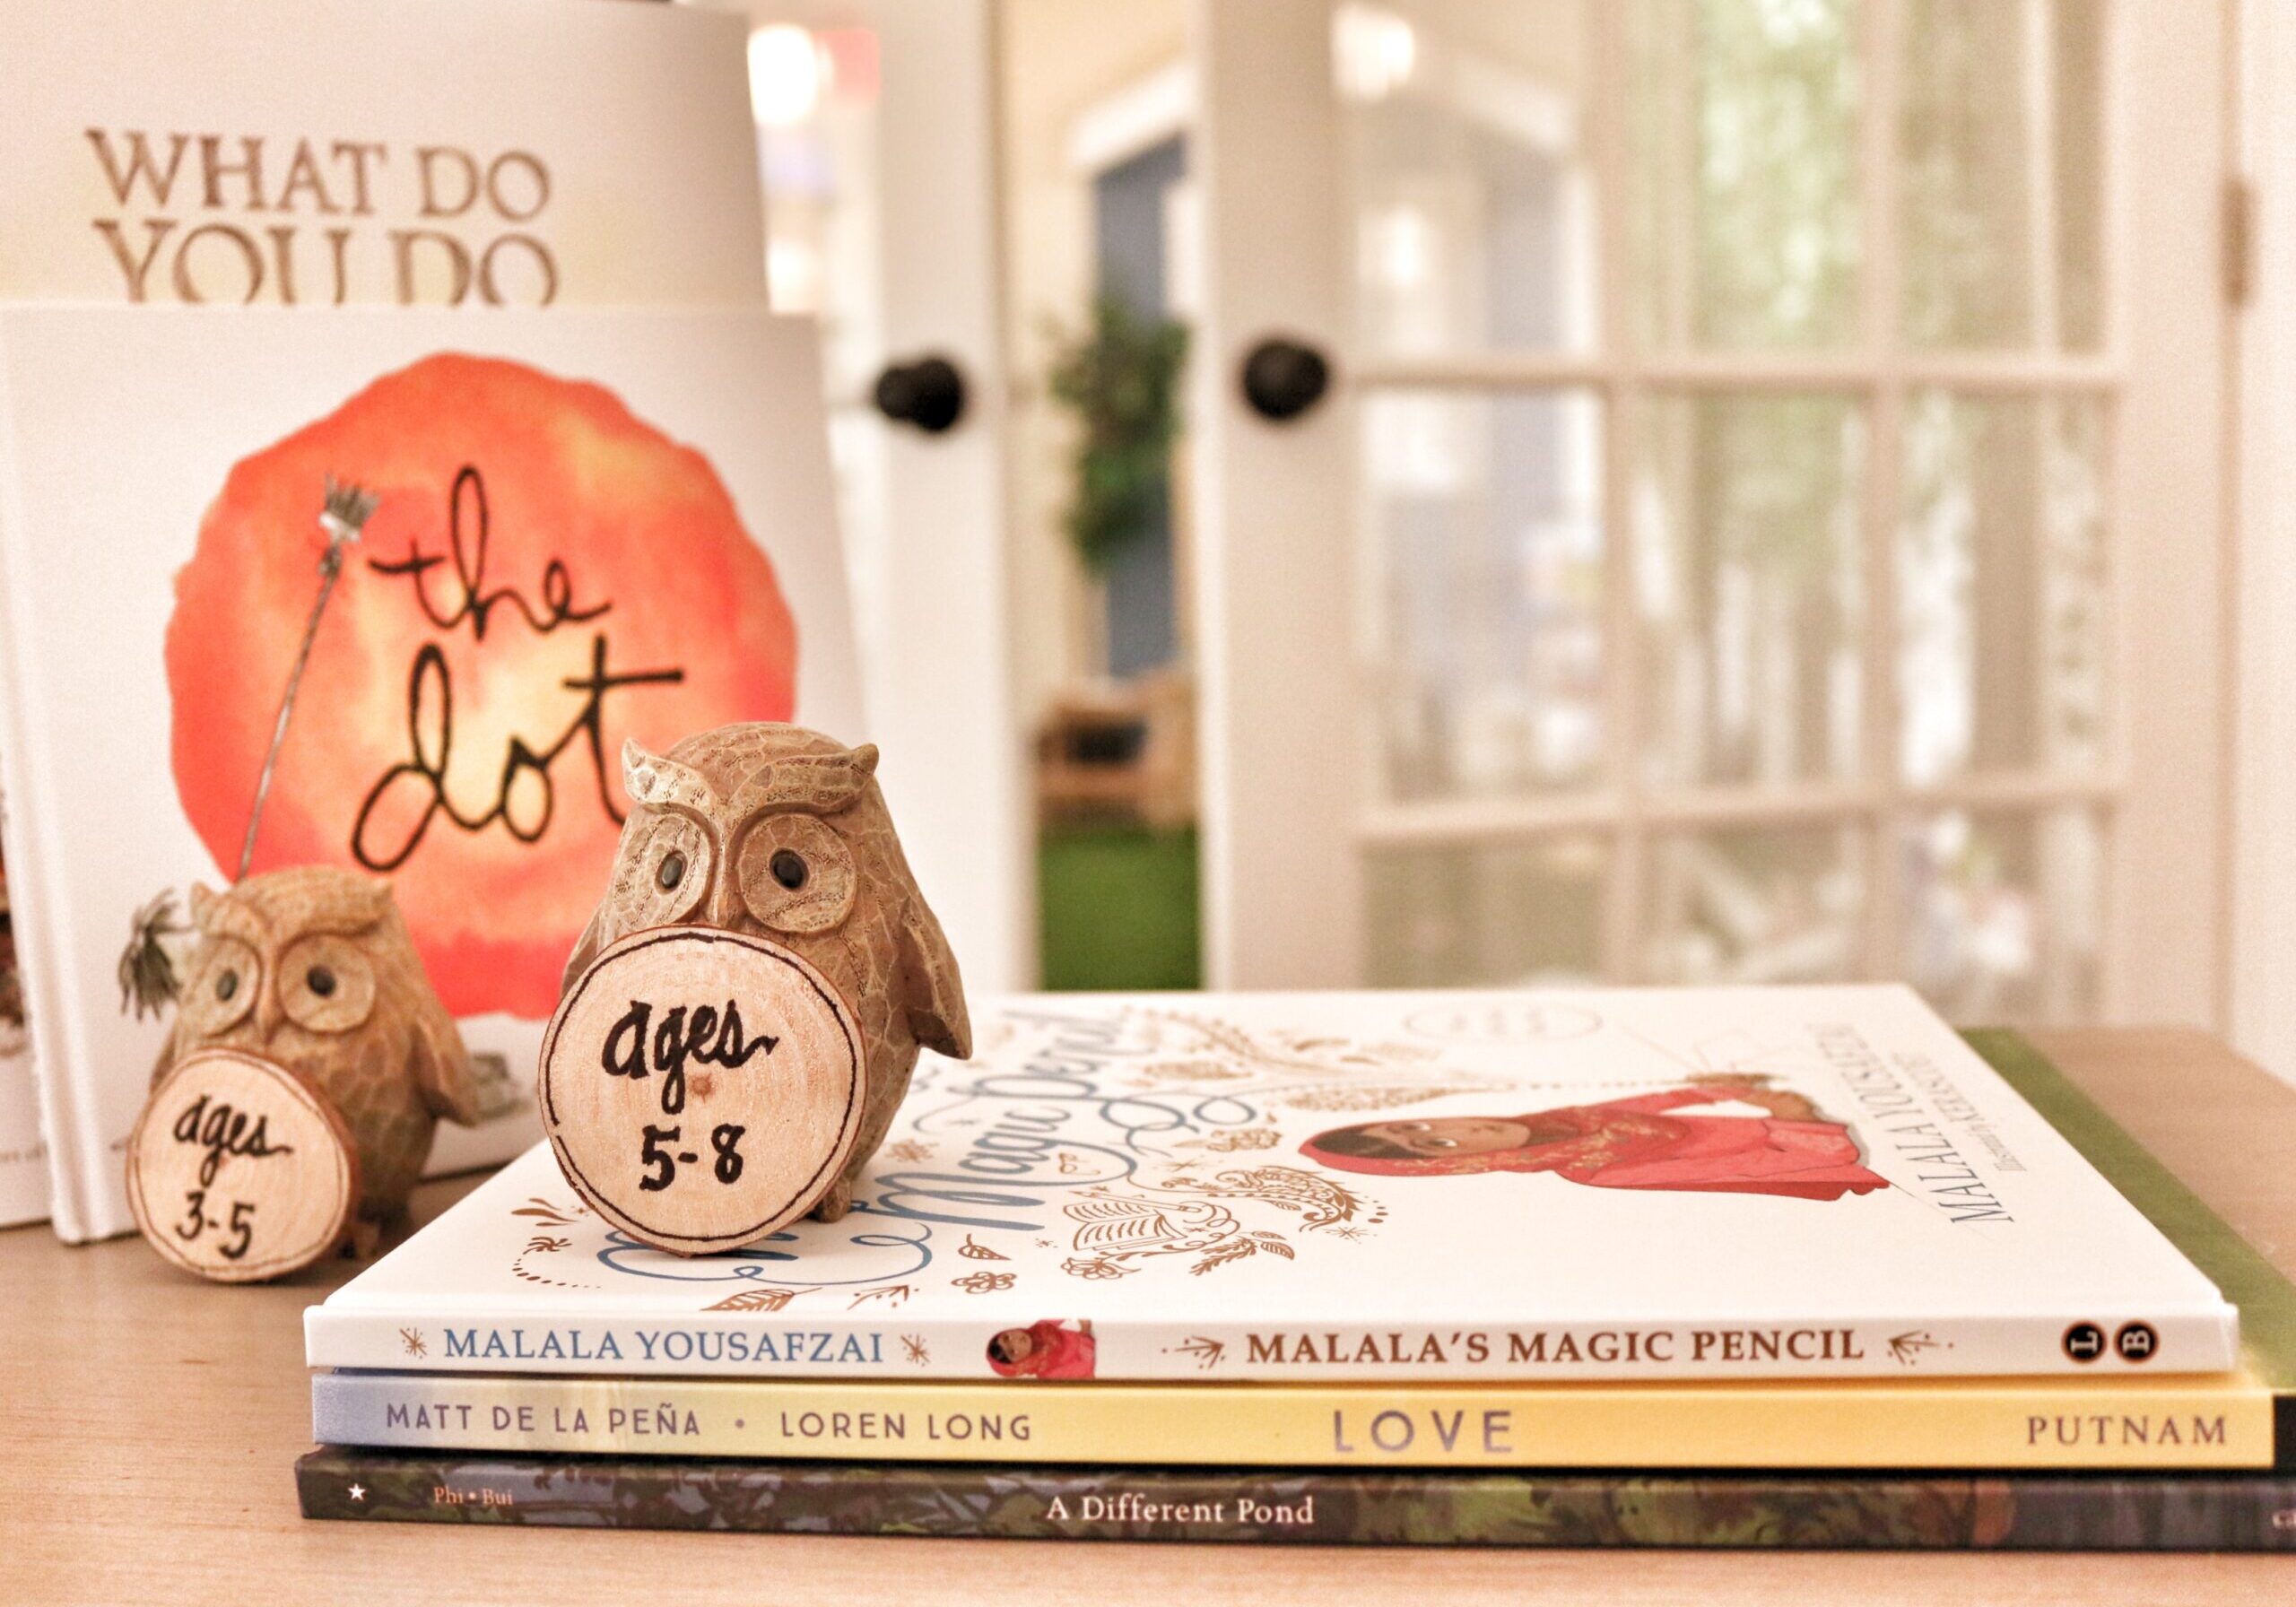 Photo of stacked books with a wooden owl on top holding a sig that says "ages 5 - 8"